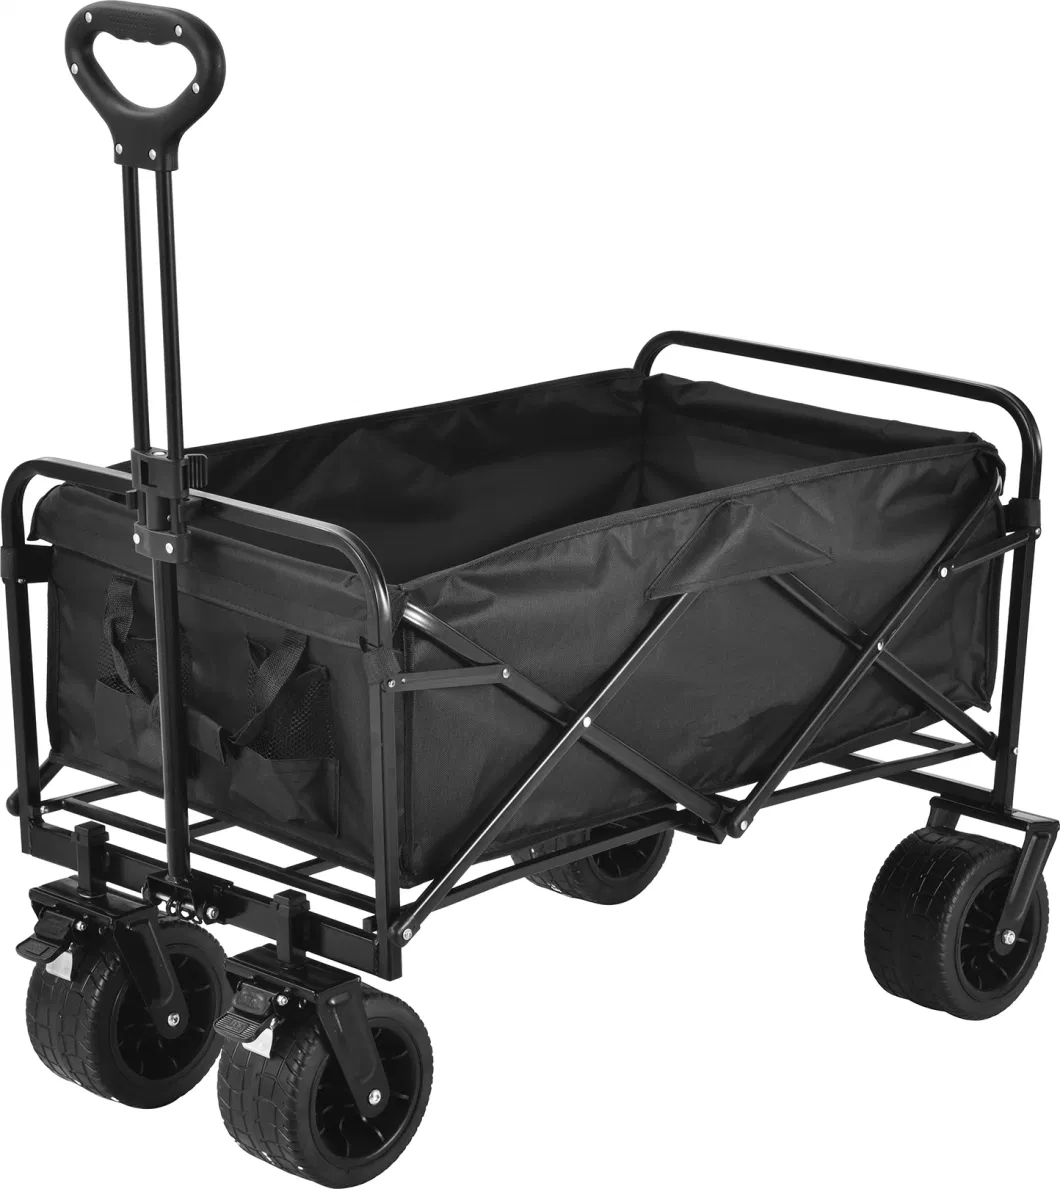 Camping Wagon Outdoor Picnic Beach Cart Trolley Handle Foldable Collapsible Folding Utility Cart